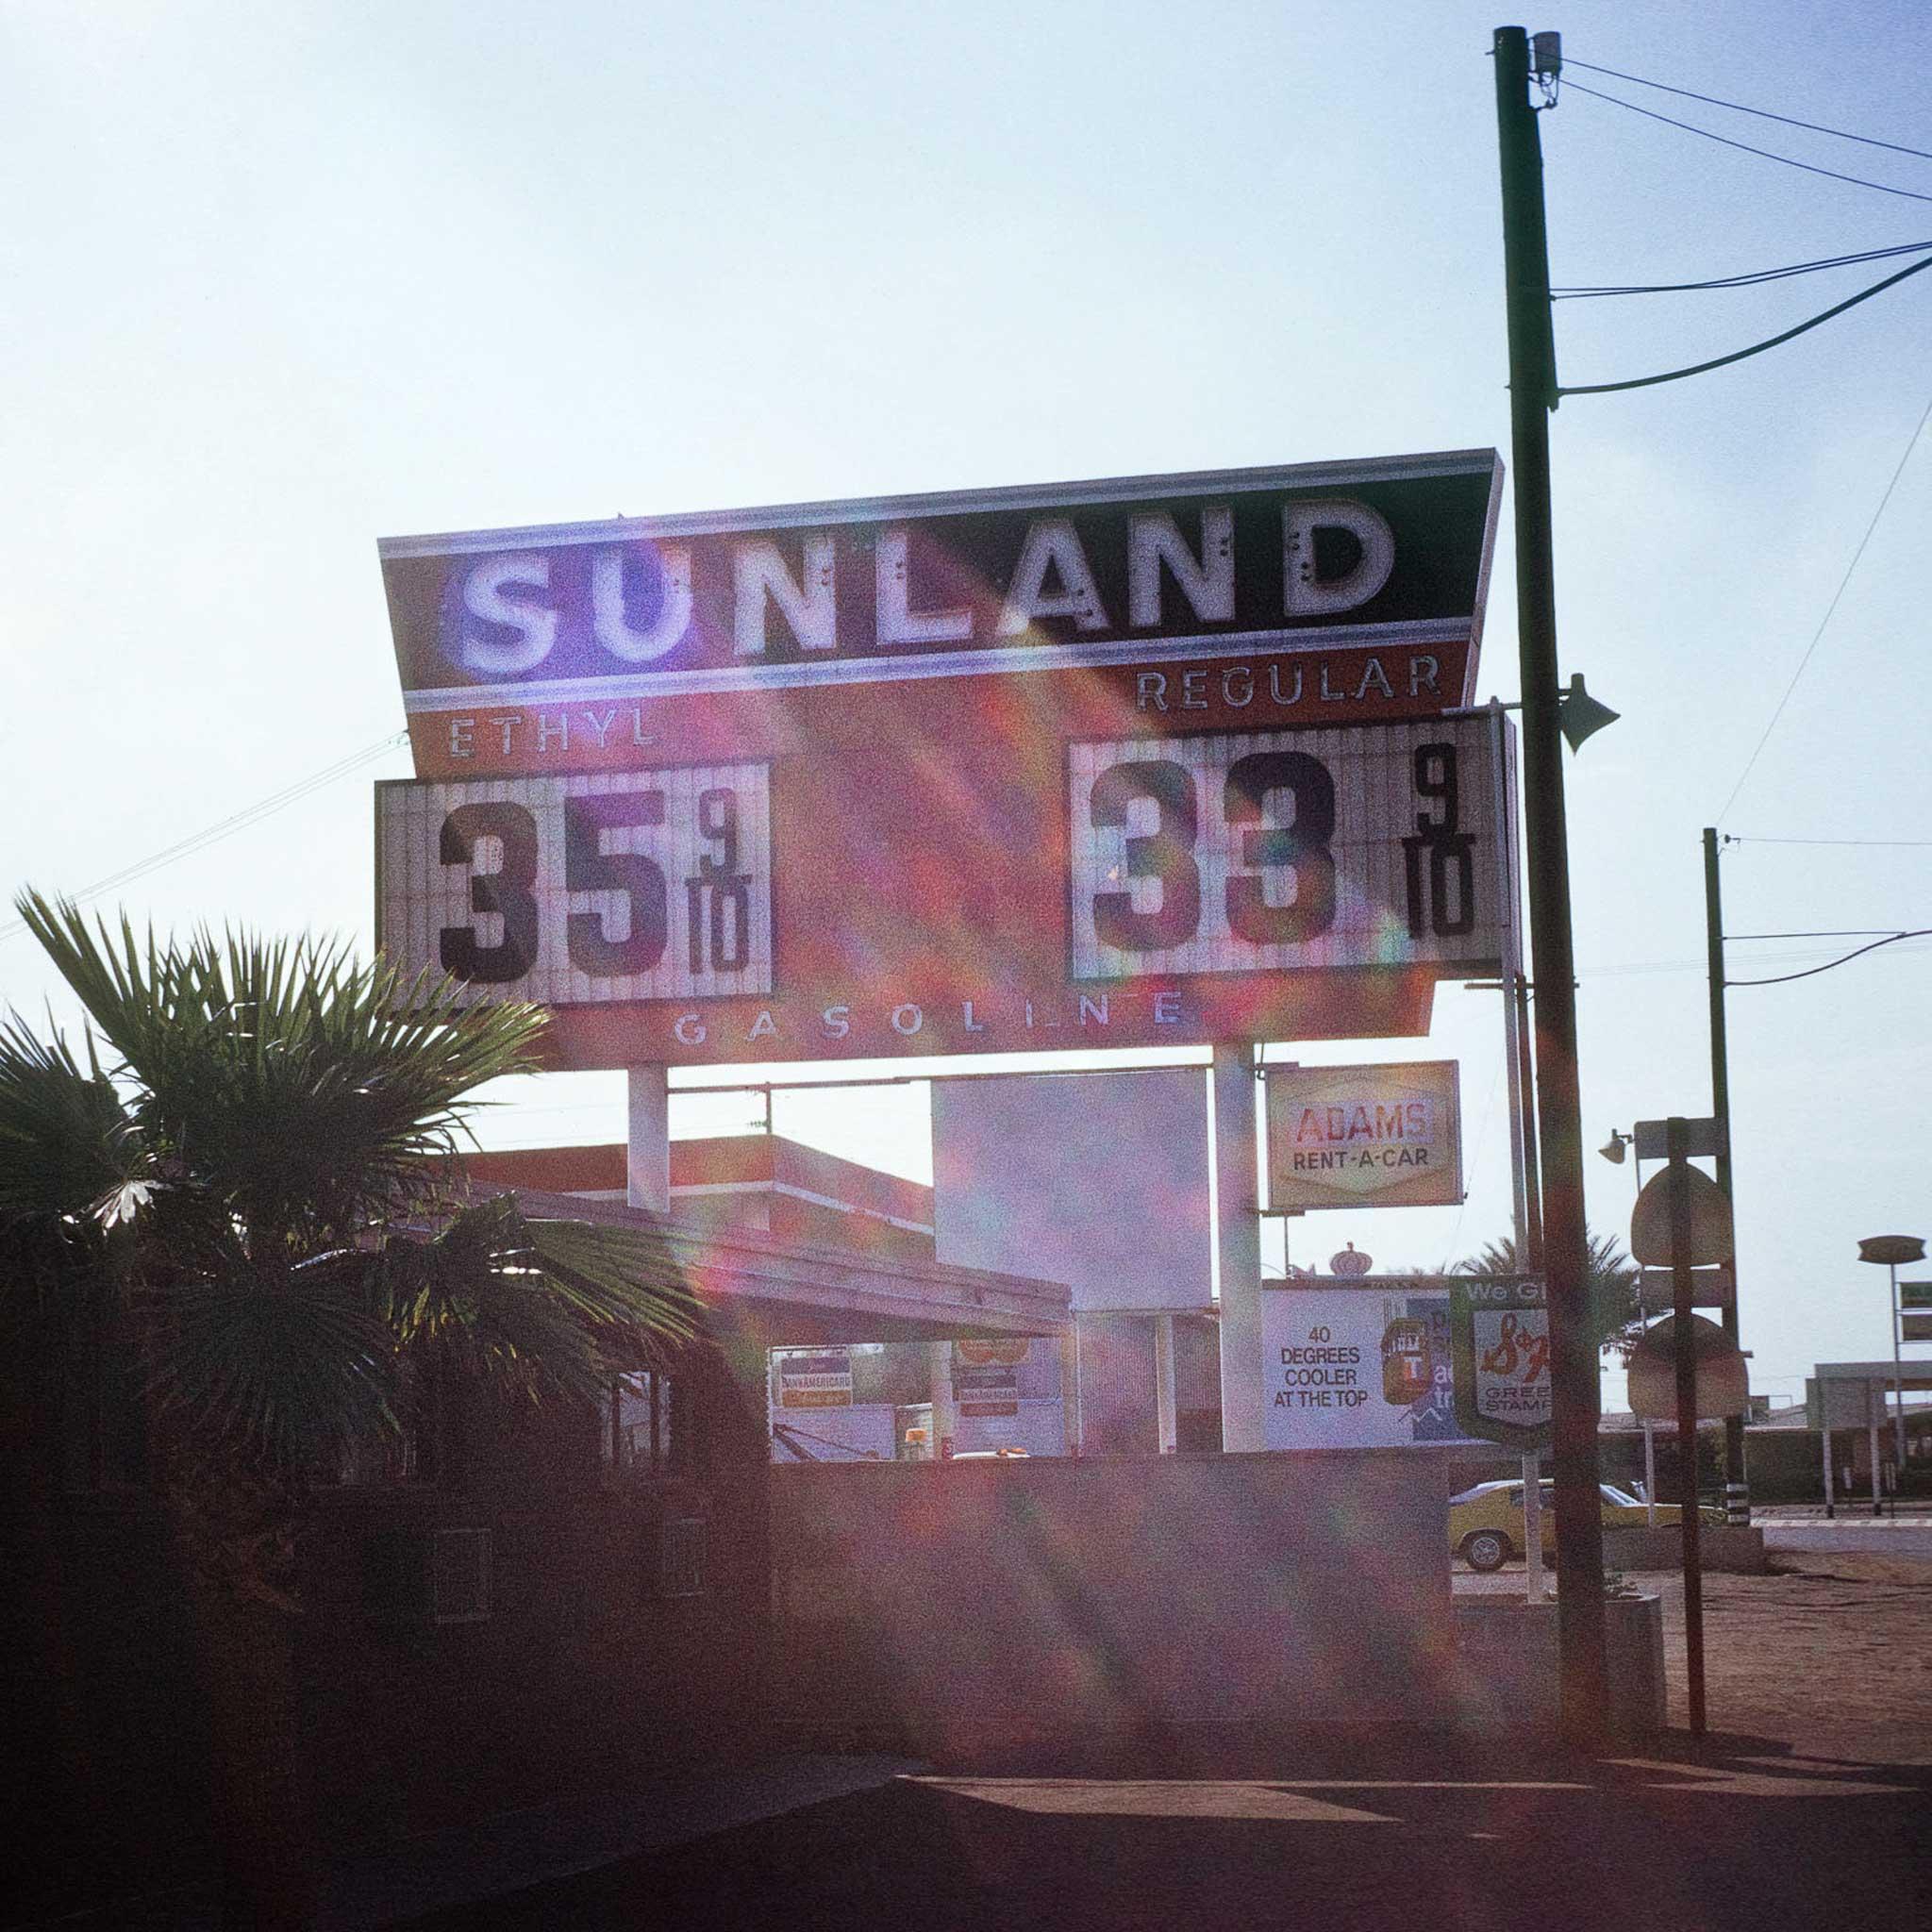 A gas station sign with gas prices and the word "Sunland"